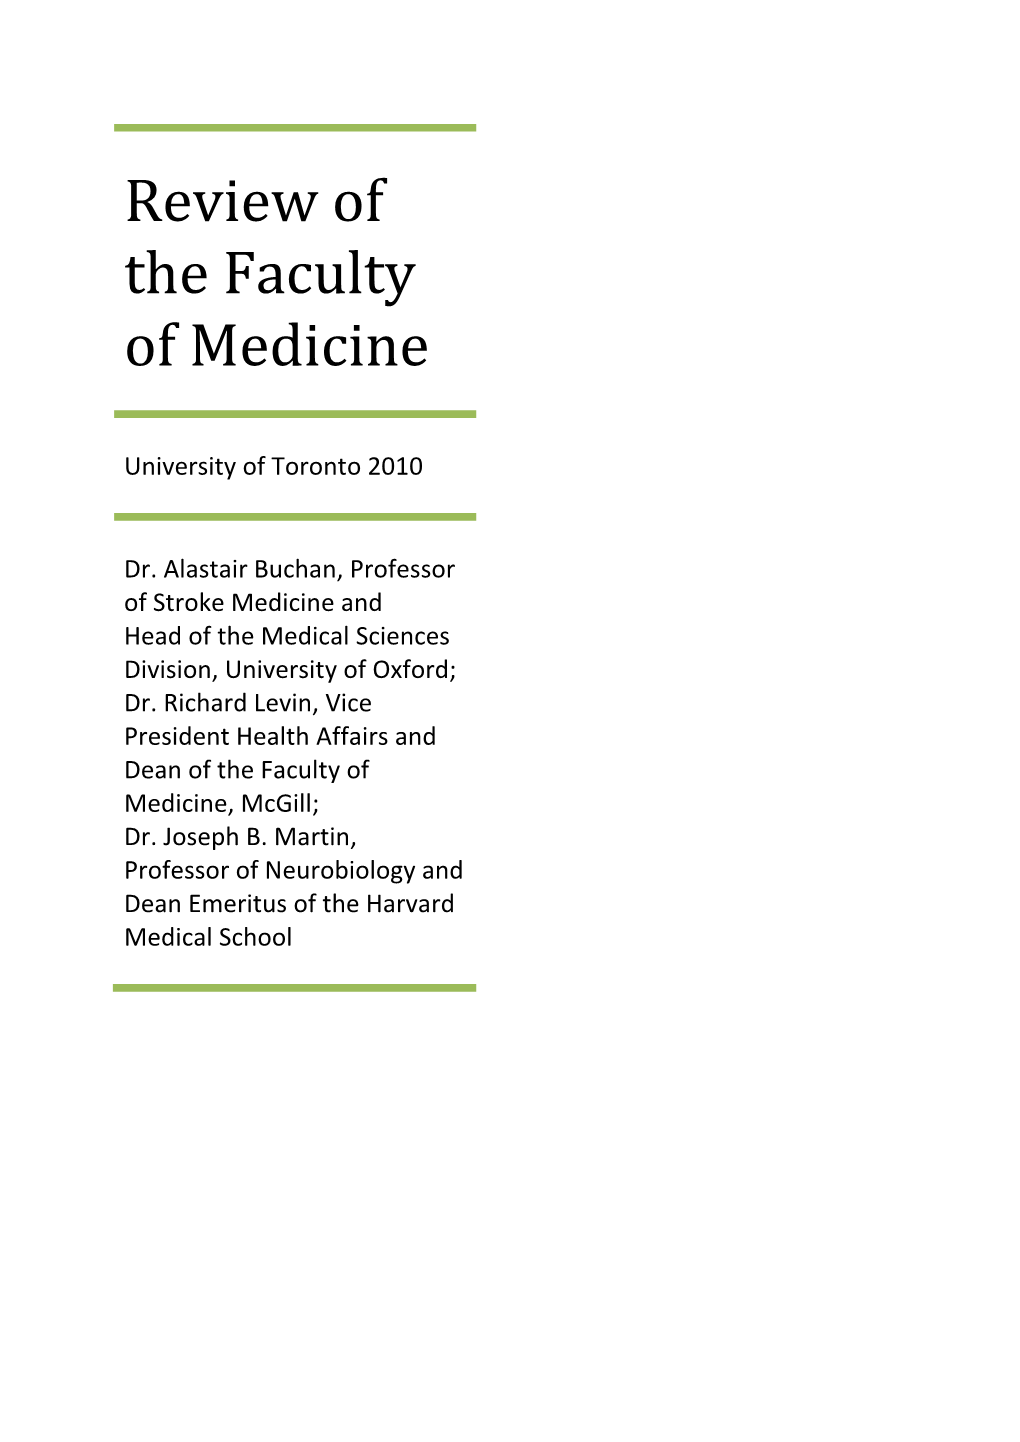 Review of the Faculty of Medicine